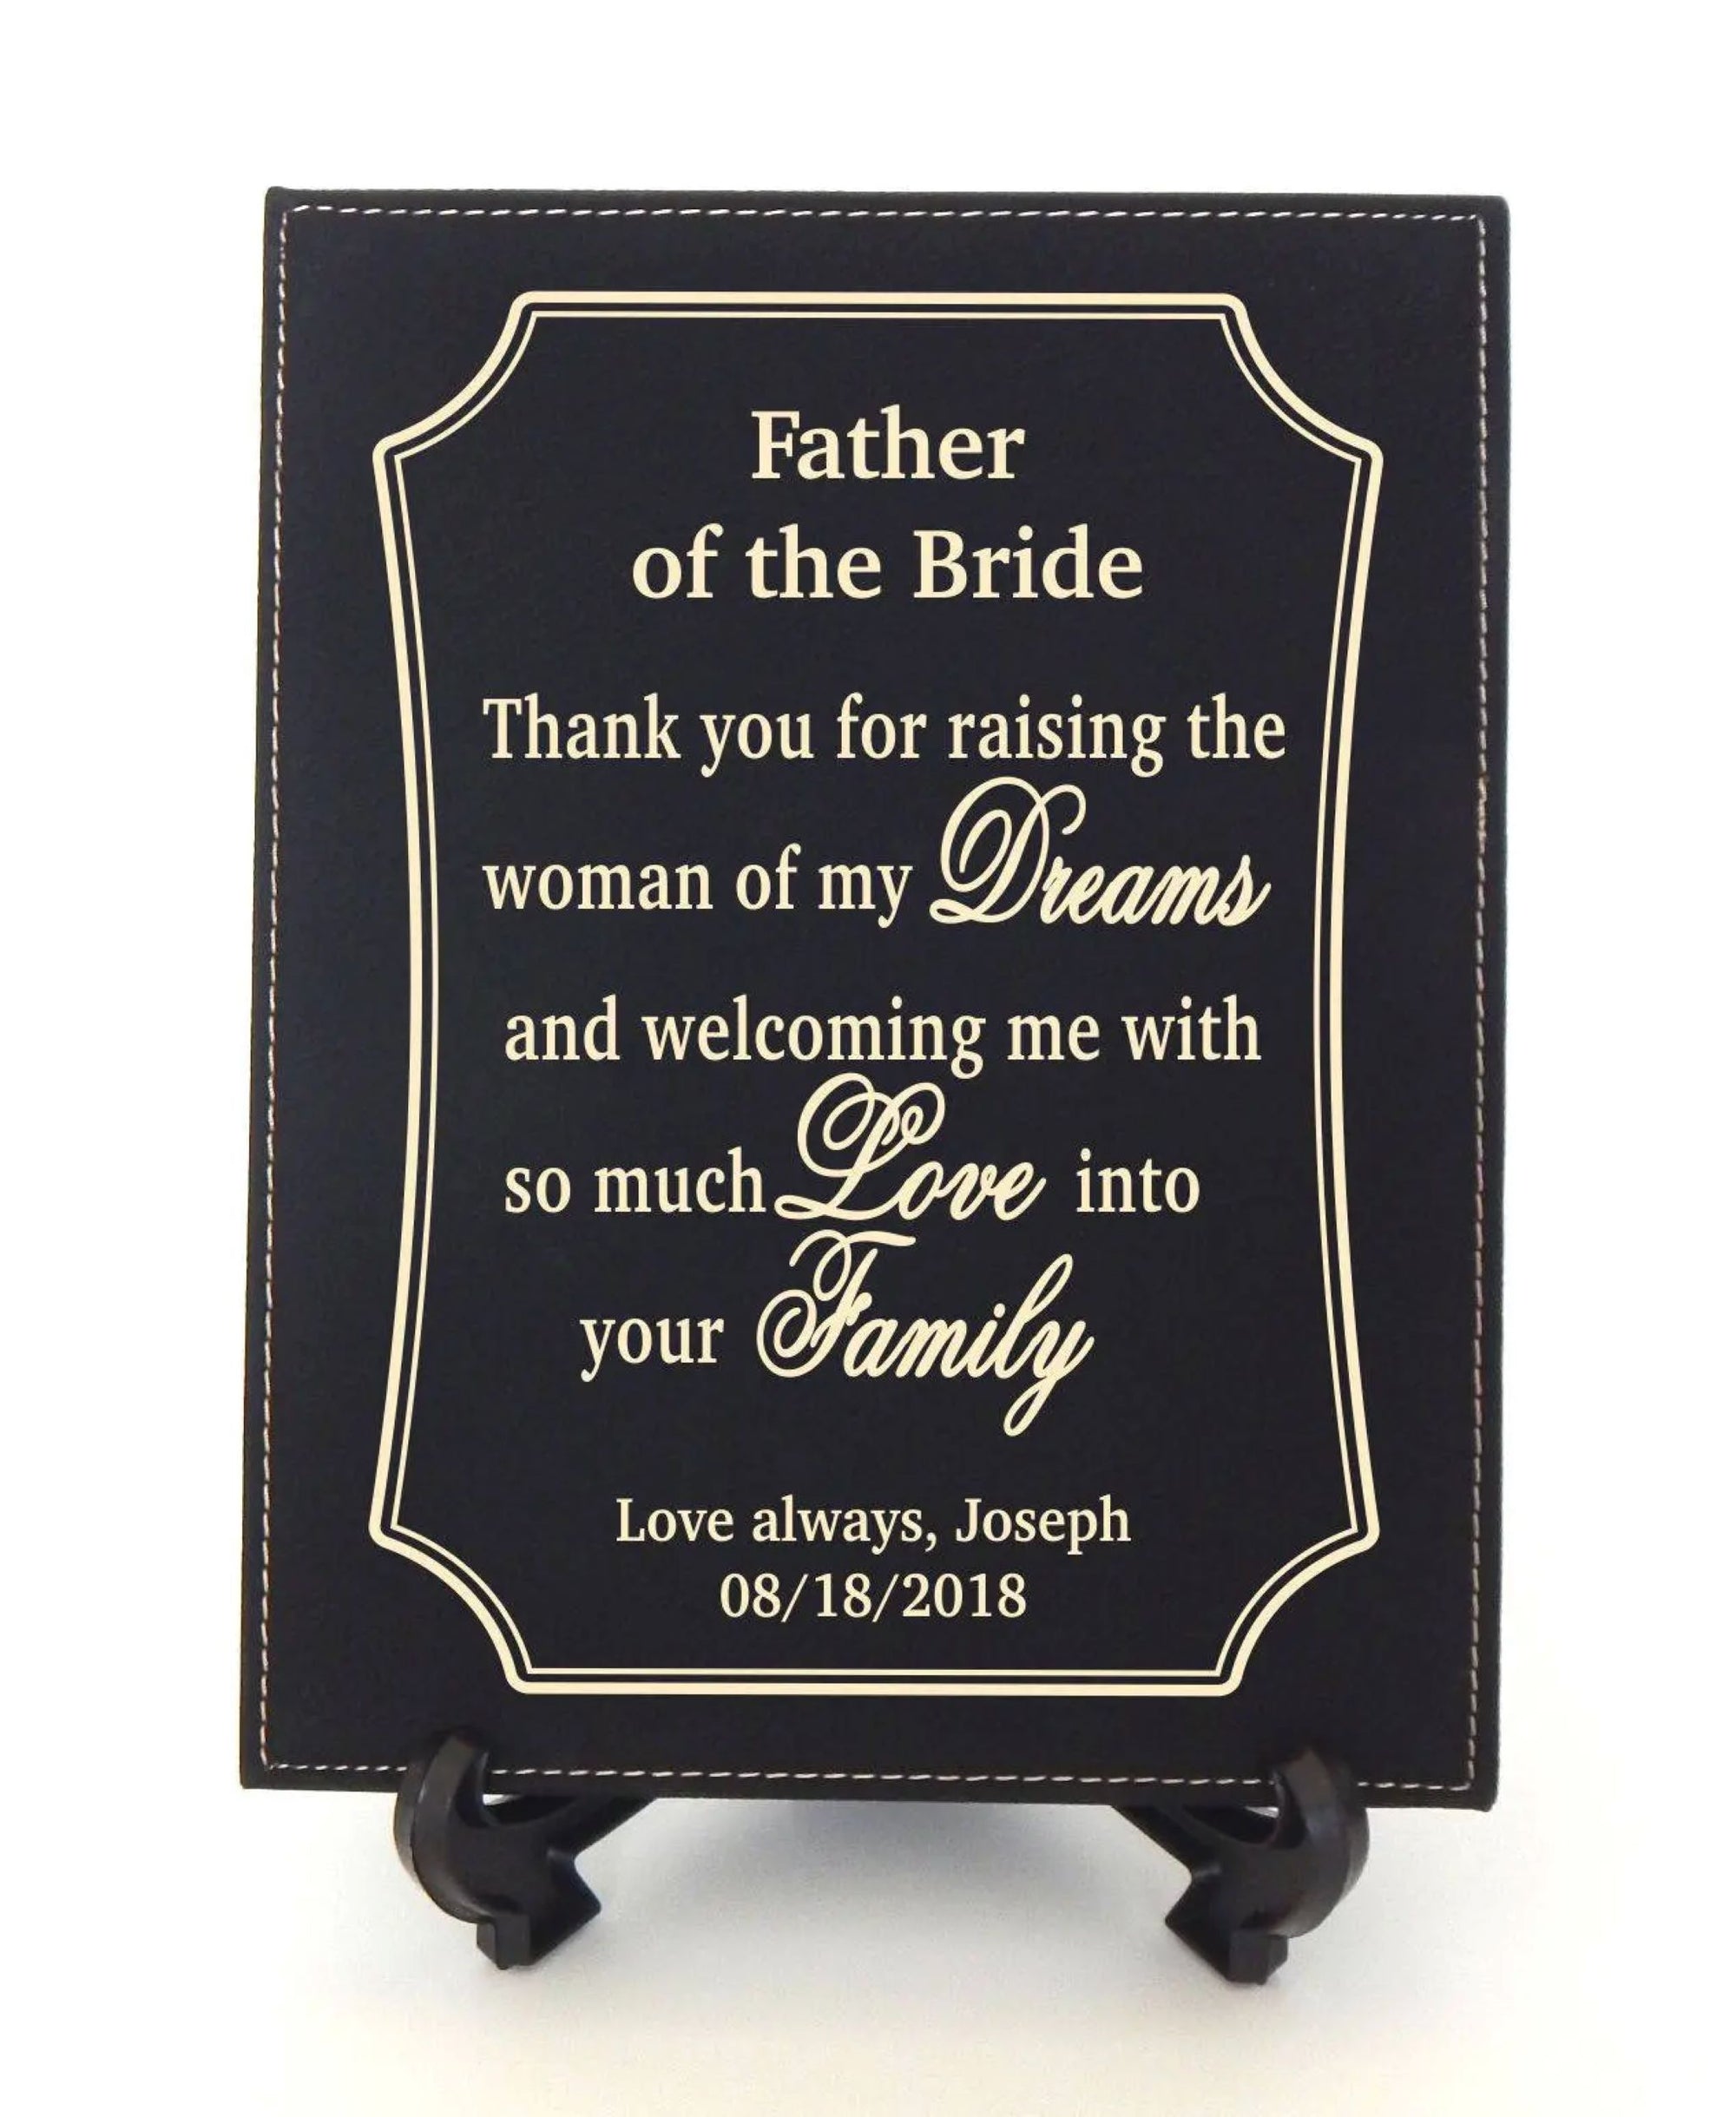 Father of the Bride Gift from Groom | Personalized Wedding Thank you Plaque for Parents